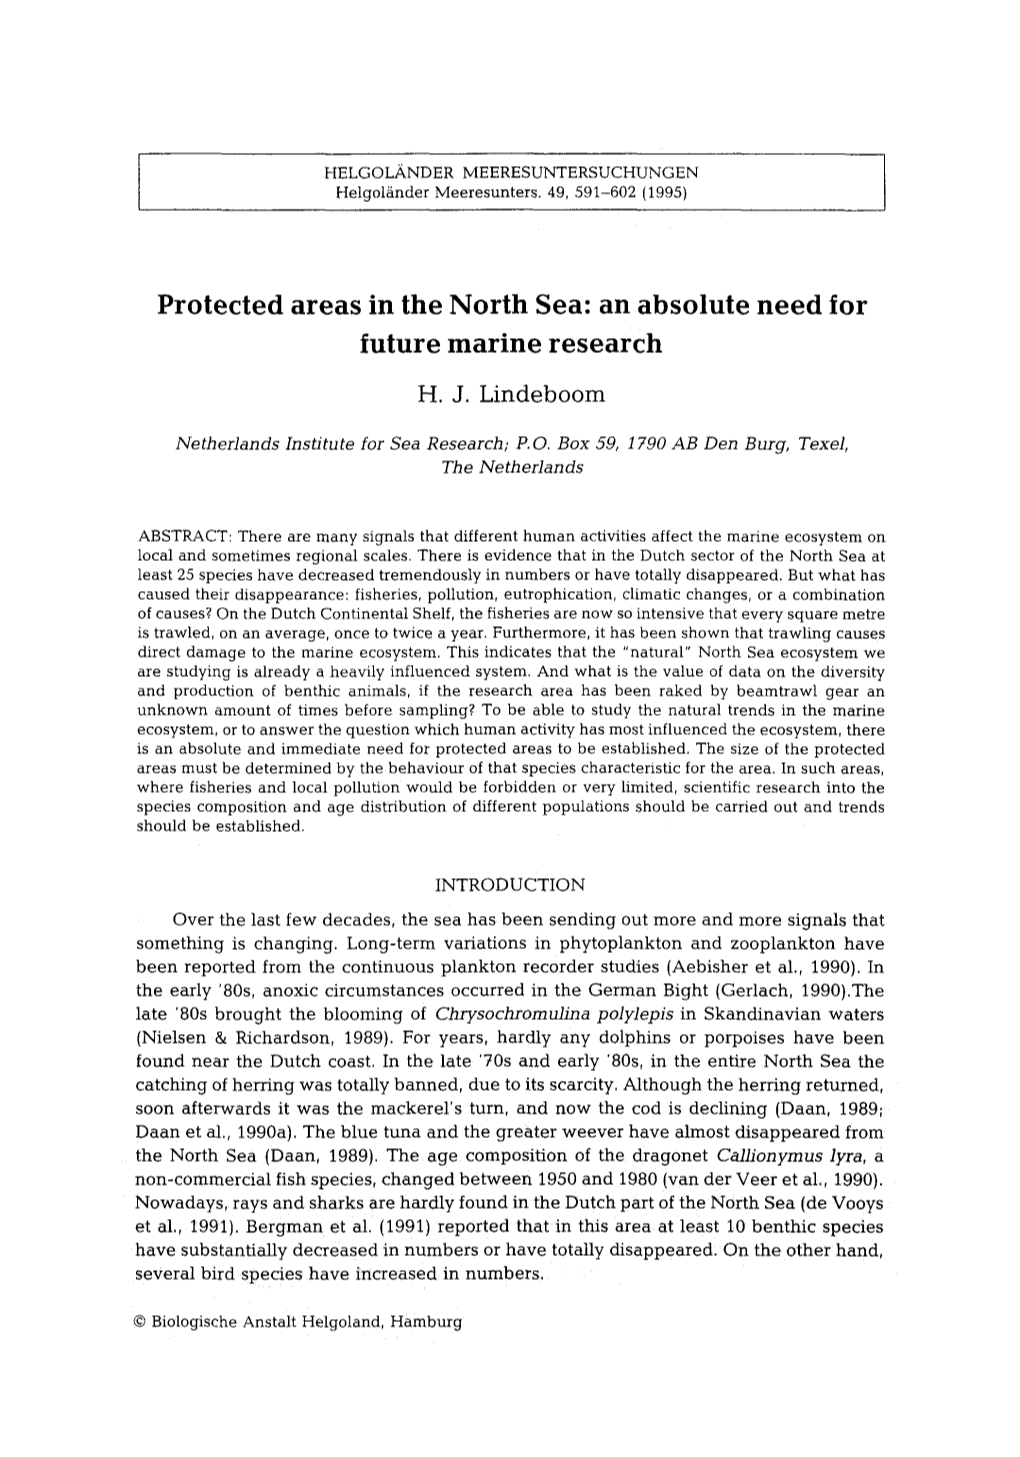 Protected Areas in the North Sea: an Absolute Need for Future Marine Research